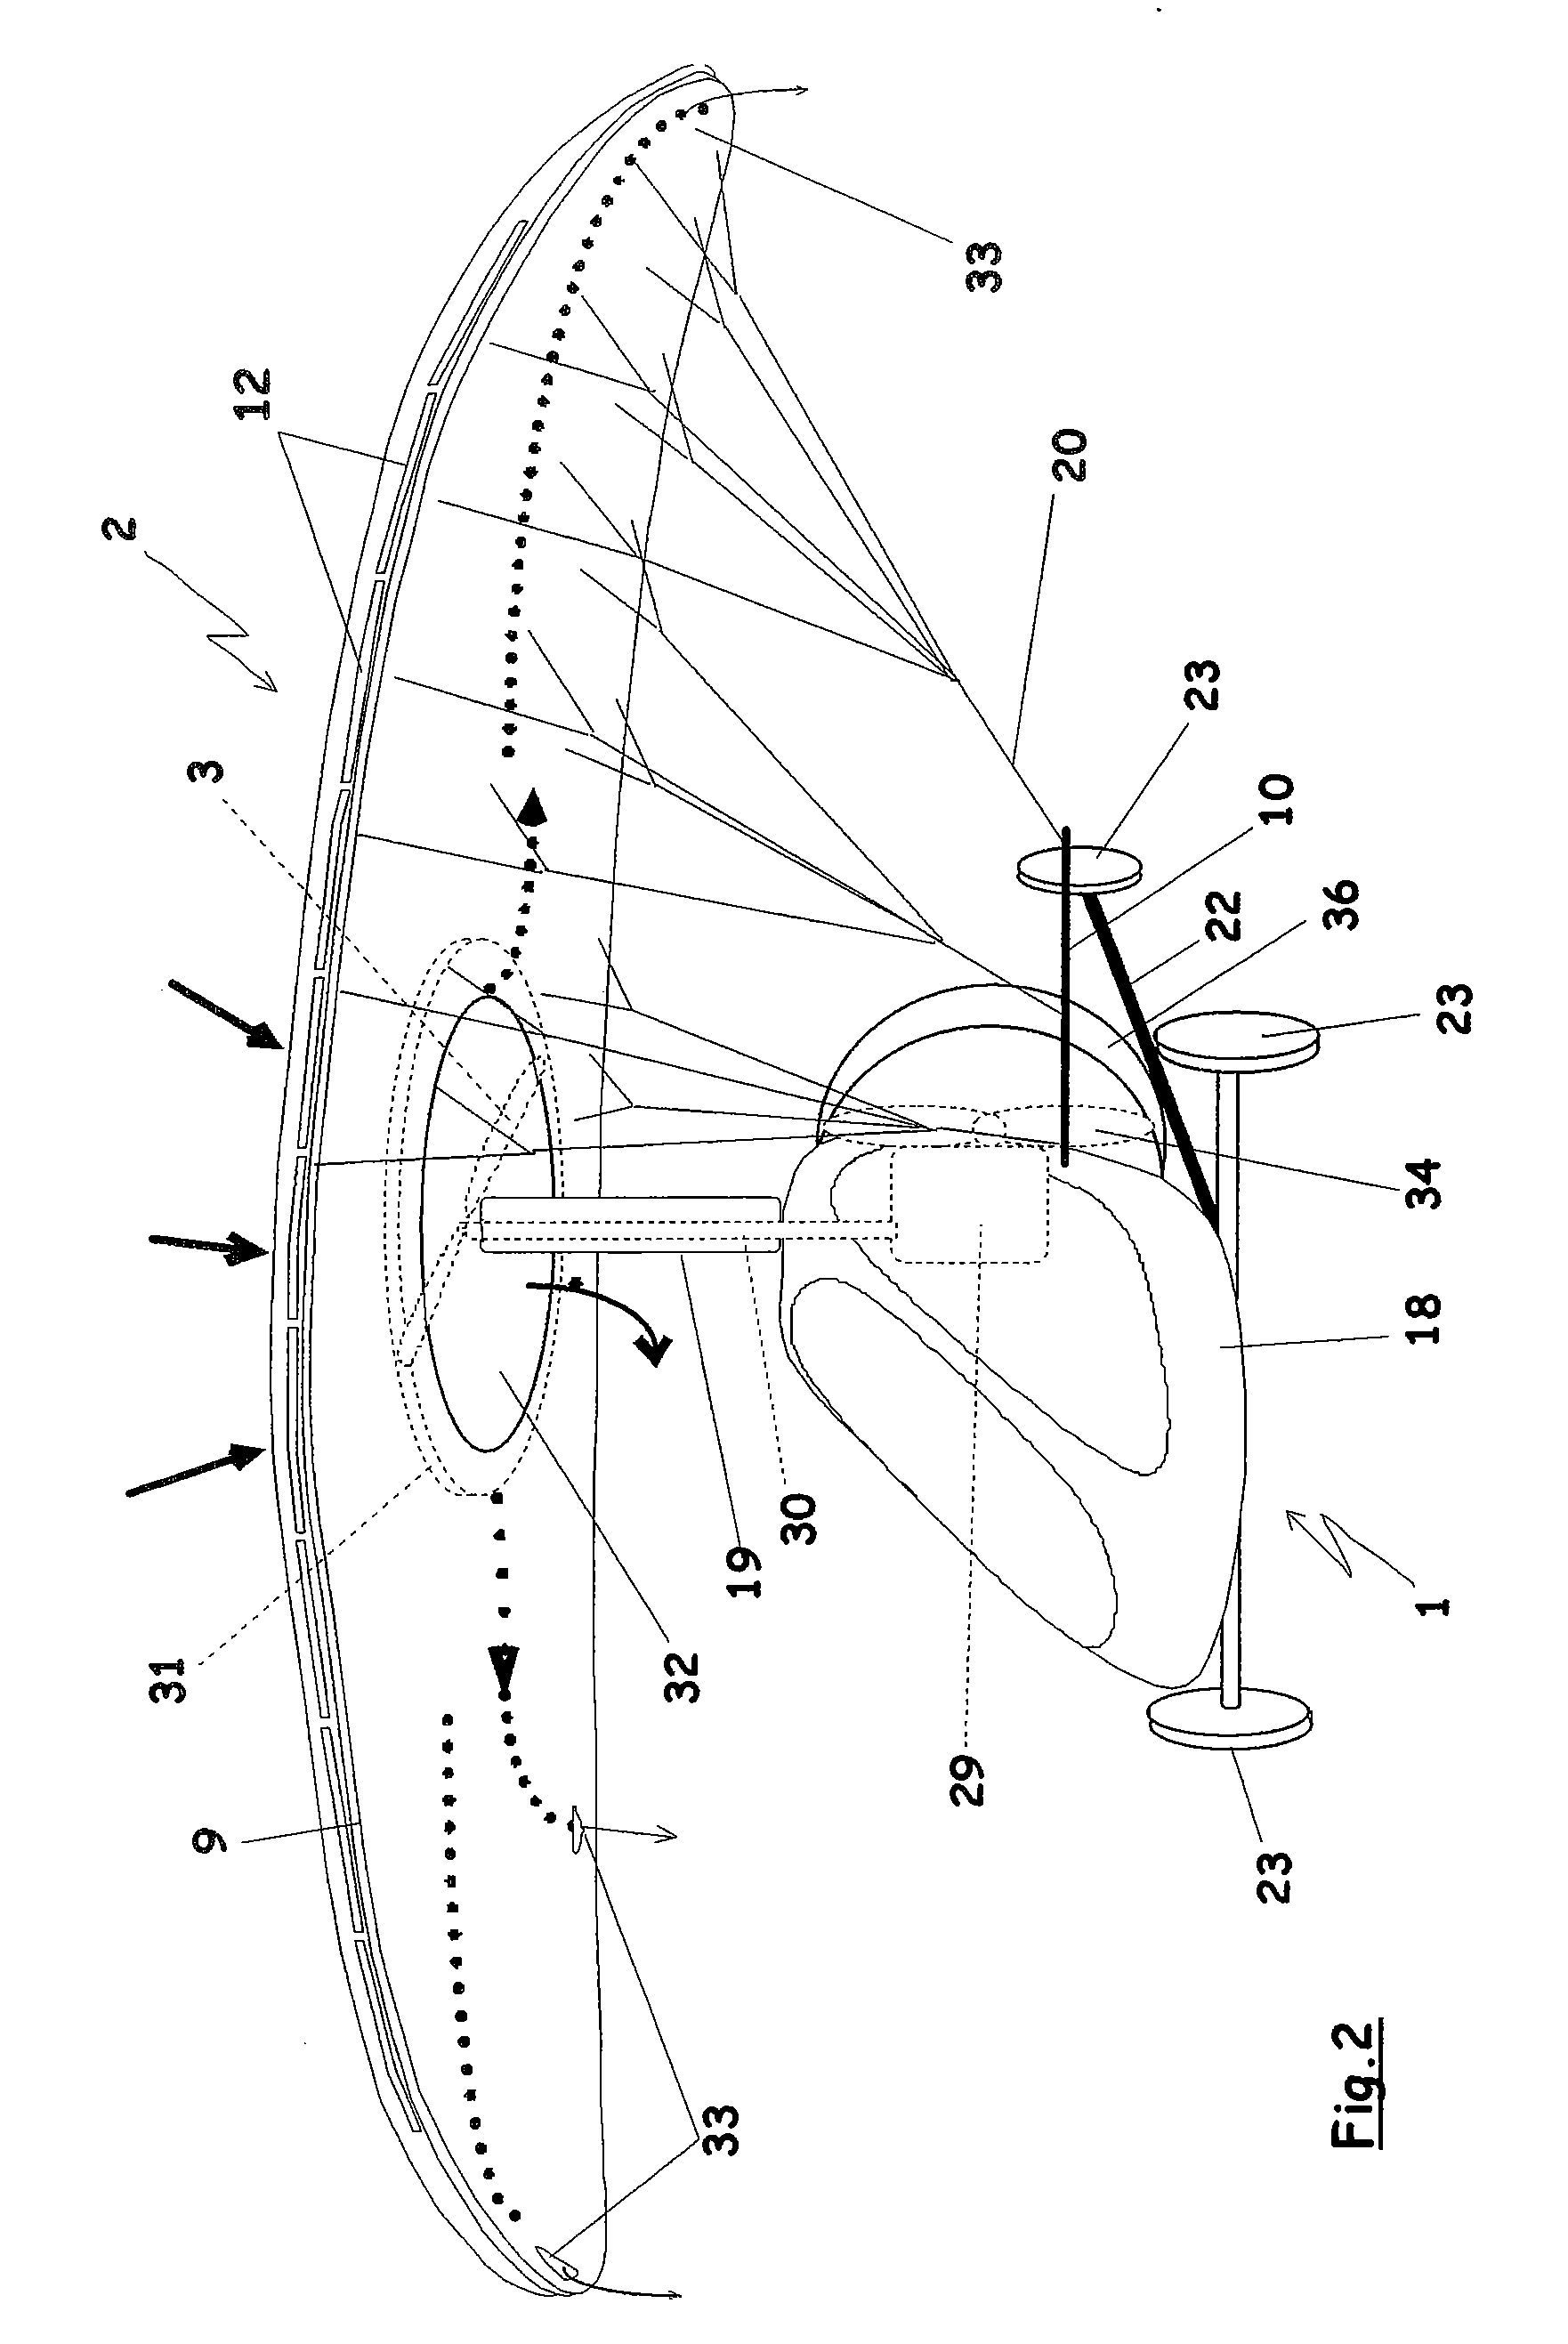 Air Locomotion Method and Multi-Purpose Aircraft Having Inflatable Wings(S) Using Two Different Inflating Systems